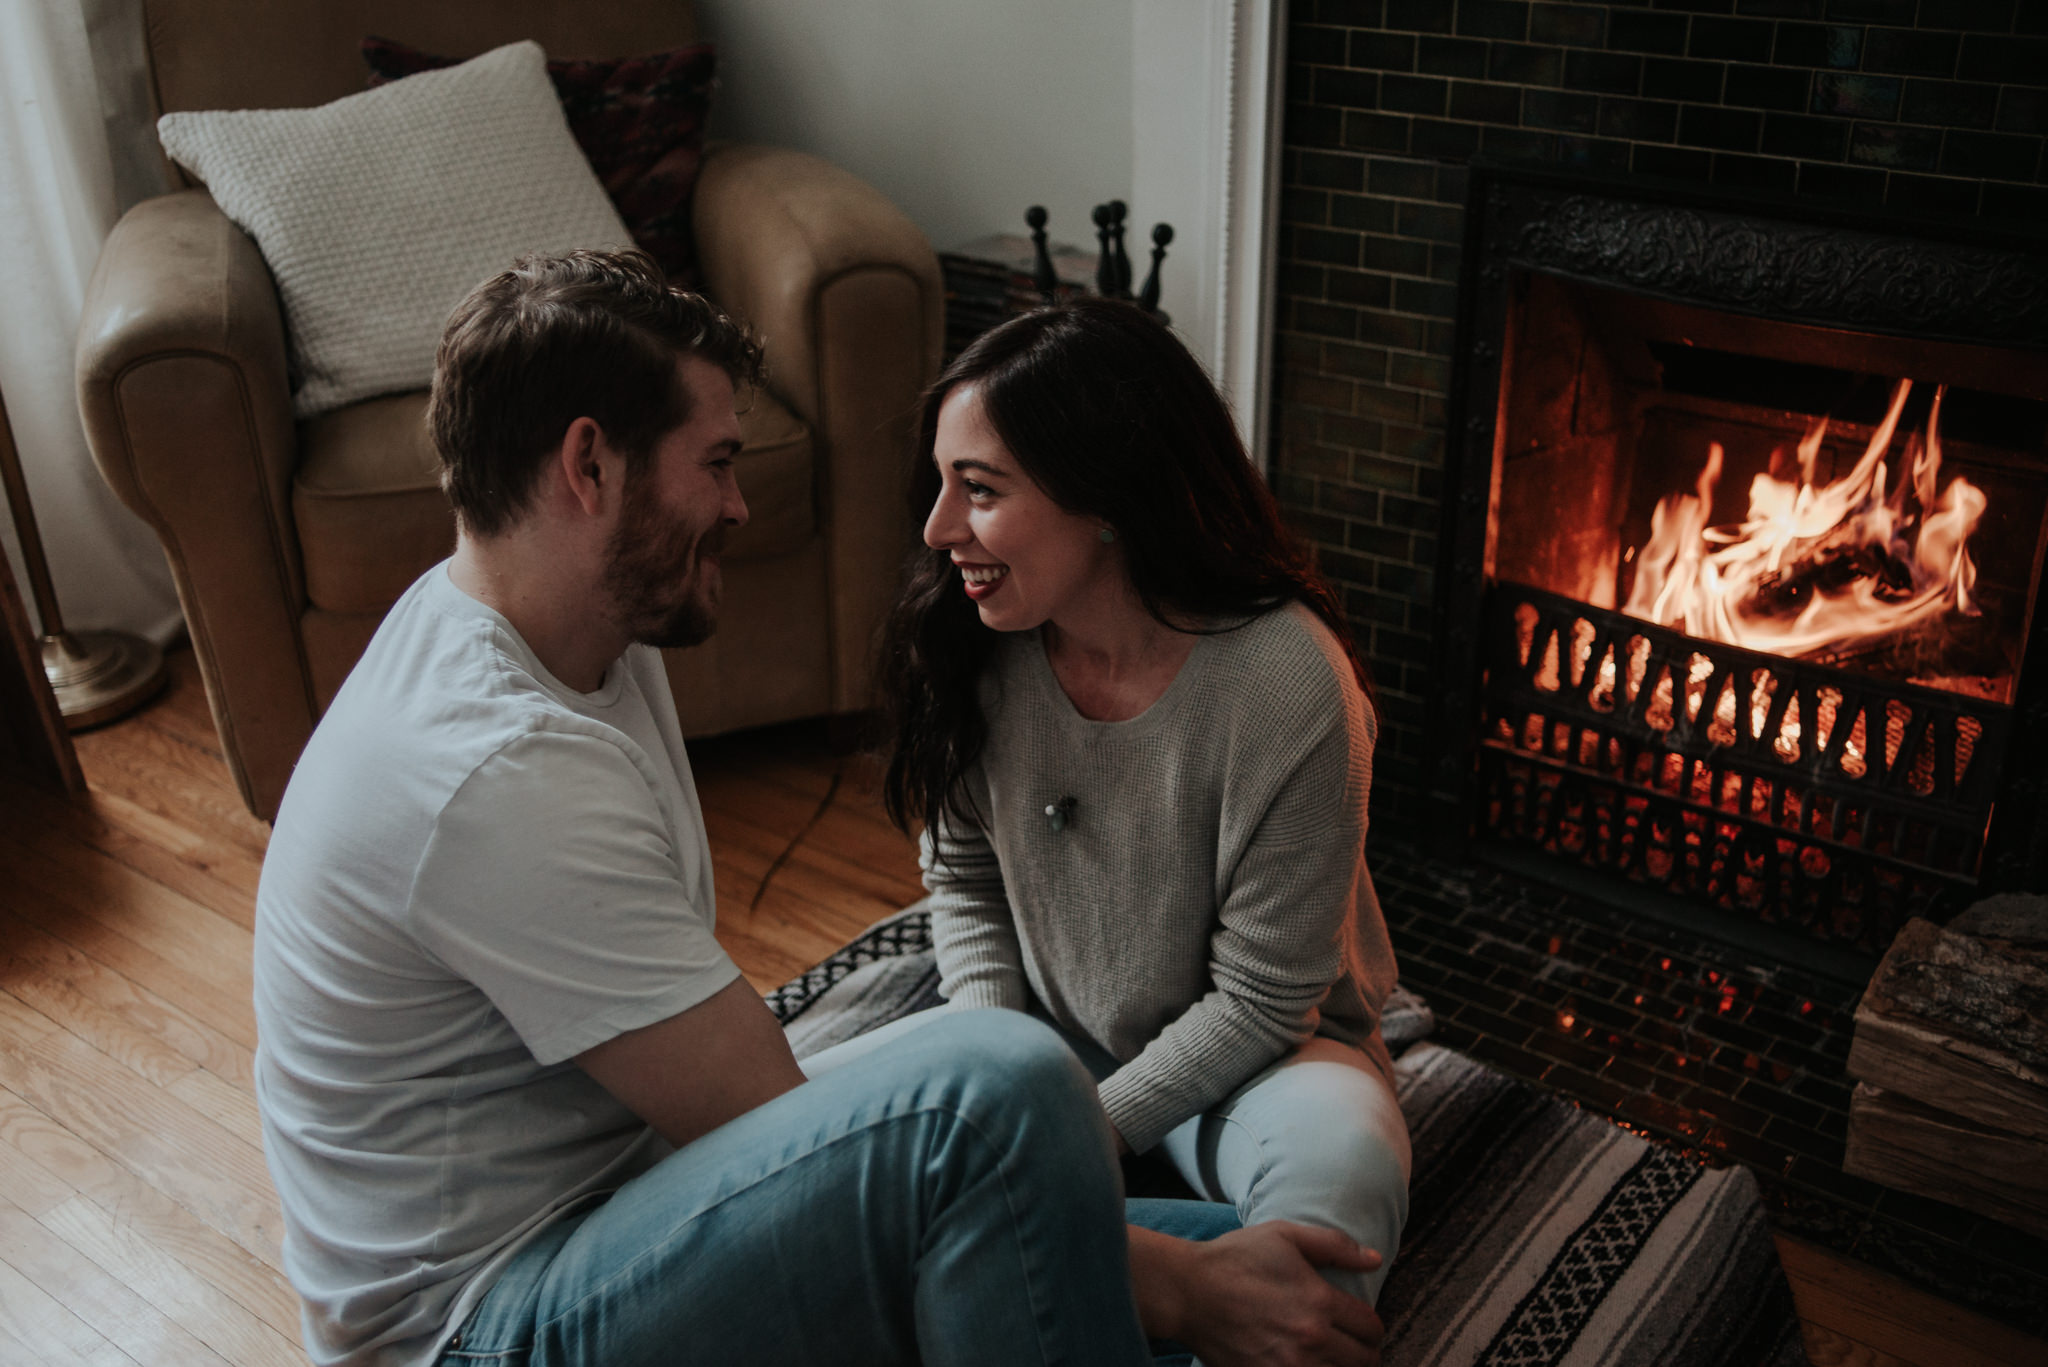 This Intimate In Home Engagement will make you want to cook up some pancakes for breakfast, cozy up by the fire and then hop in the bath tub while he reads to you and washes your hair // Photographed by Toronto Wedding Photographer Daring Wanderer